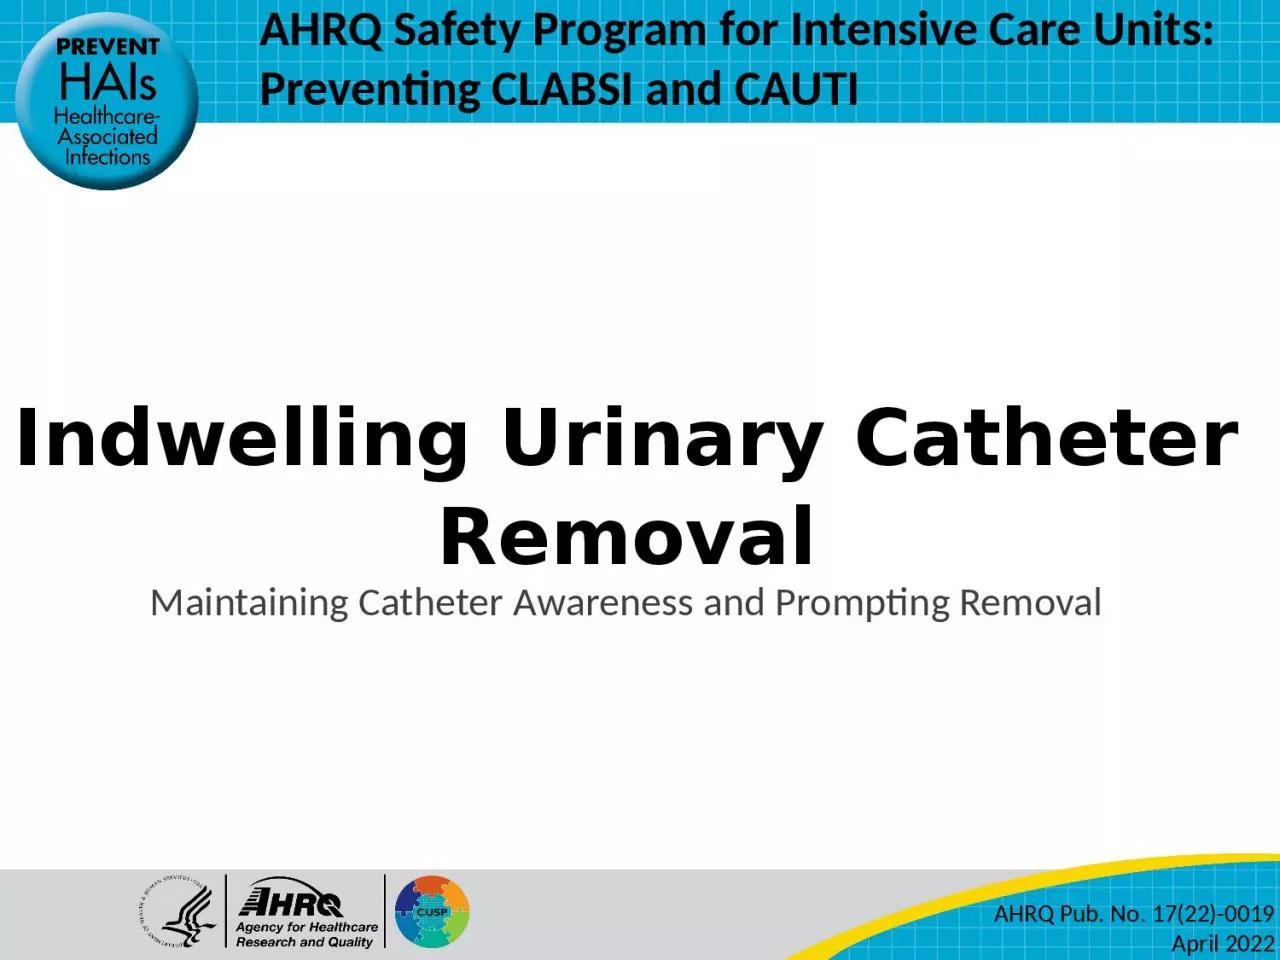 Indwelling Urinary Catheter Removal